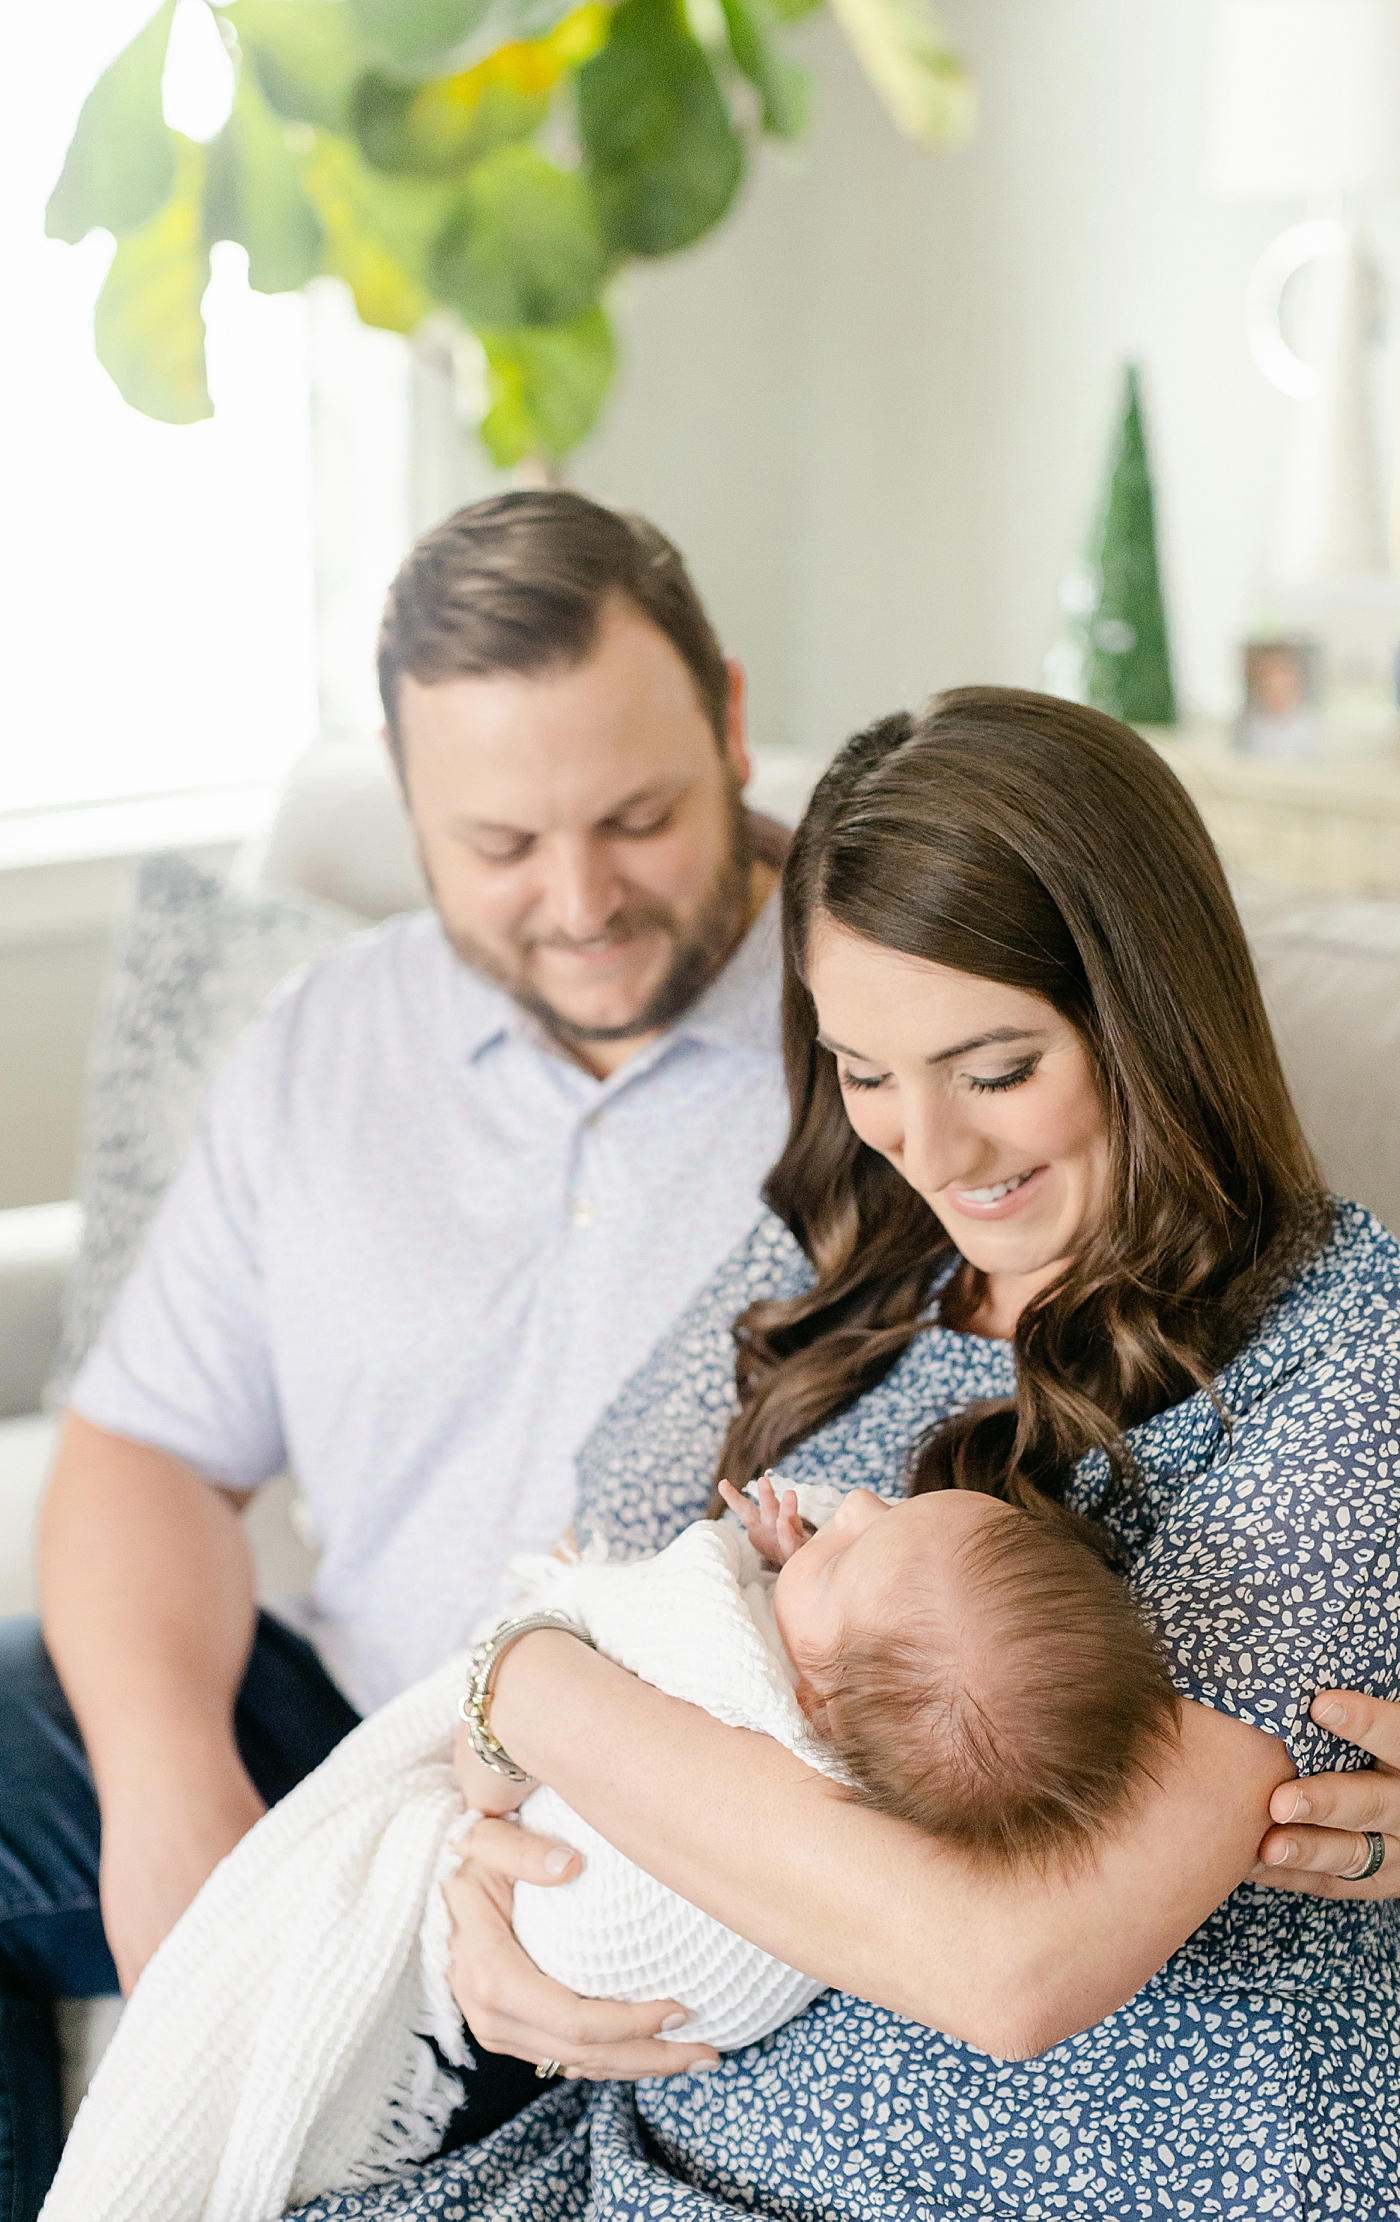 during his Charlotte In Home Newborn Session | Image by Chrissy Winchester 